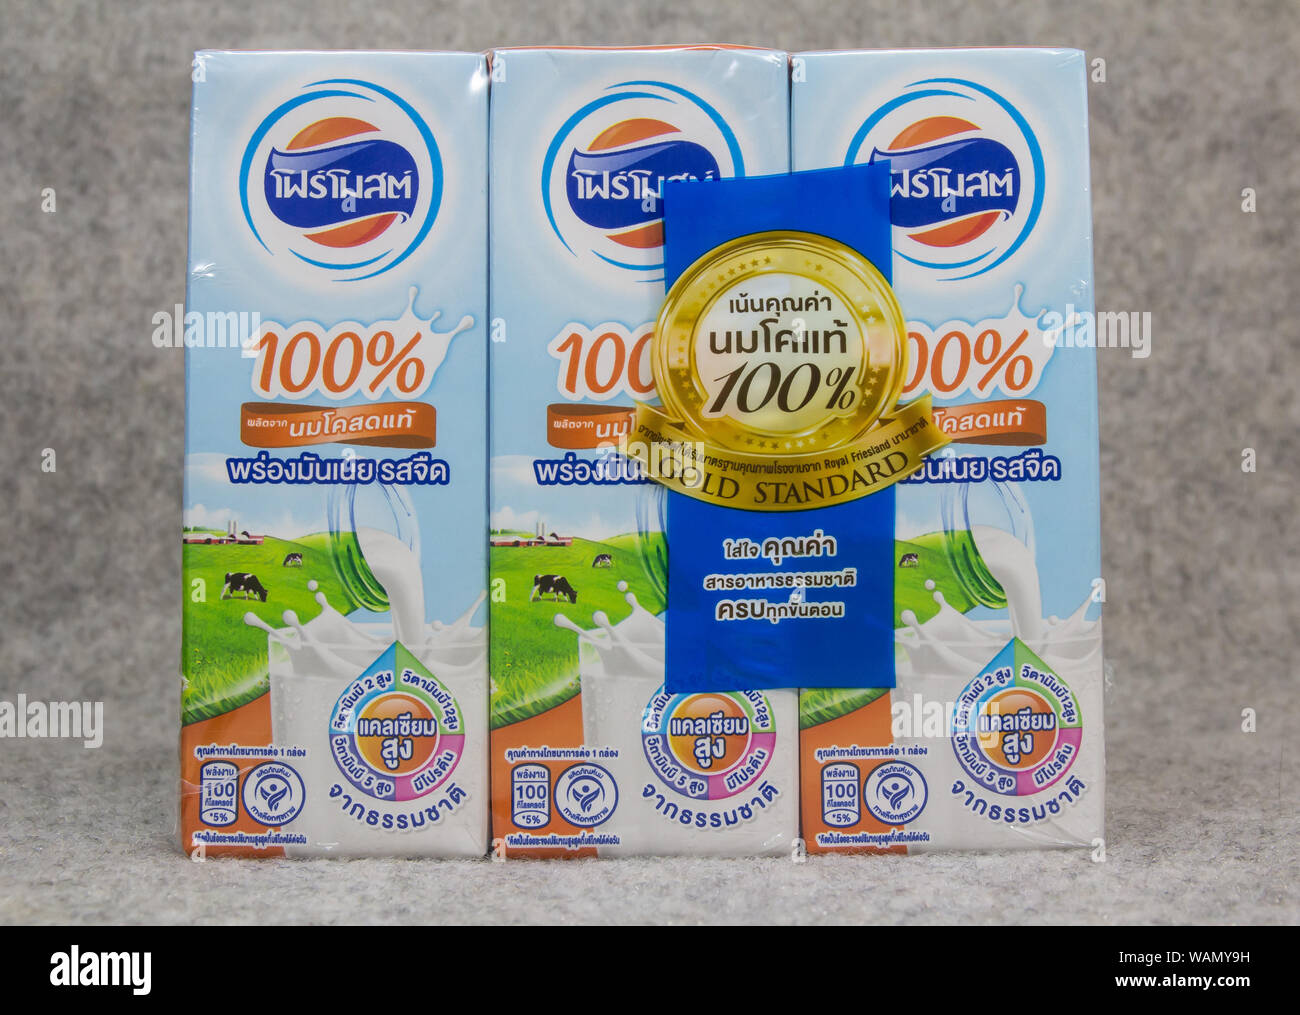 https://c8.alamy.com/comp/WAMY9H/chiangmai-thailand-august-21-2019-foremost-uht-milk-product-from-thailand-WAMY9H.jpg